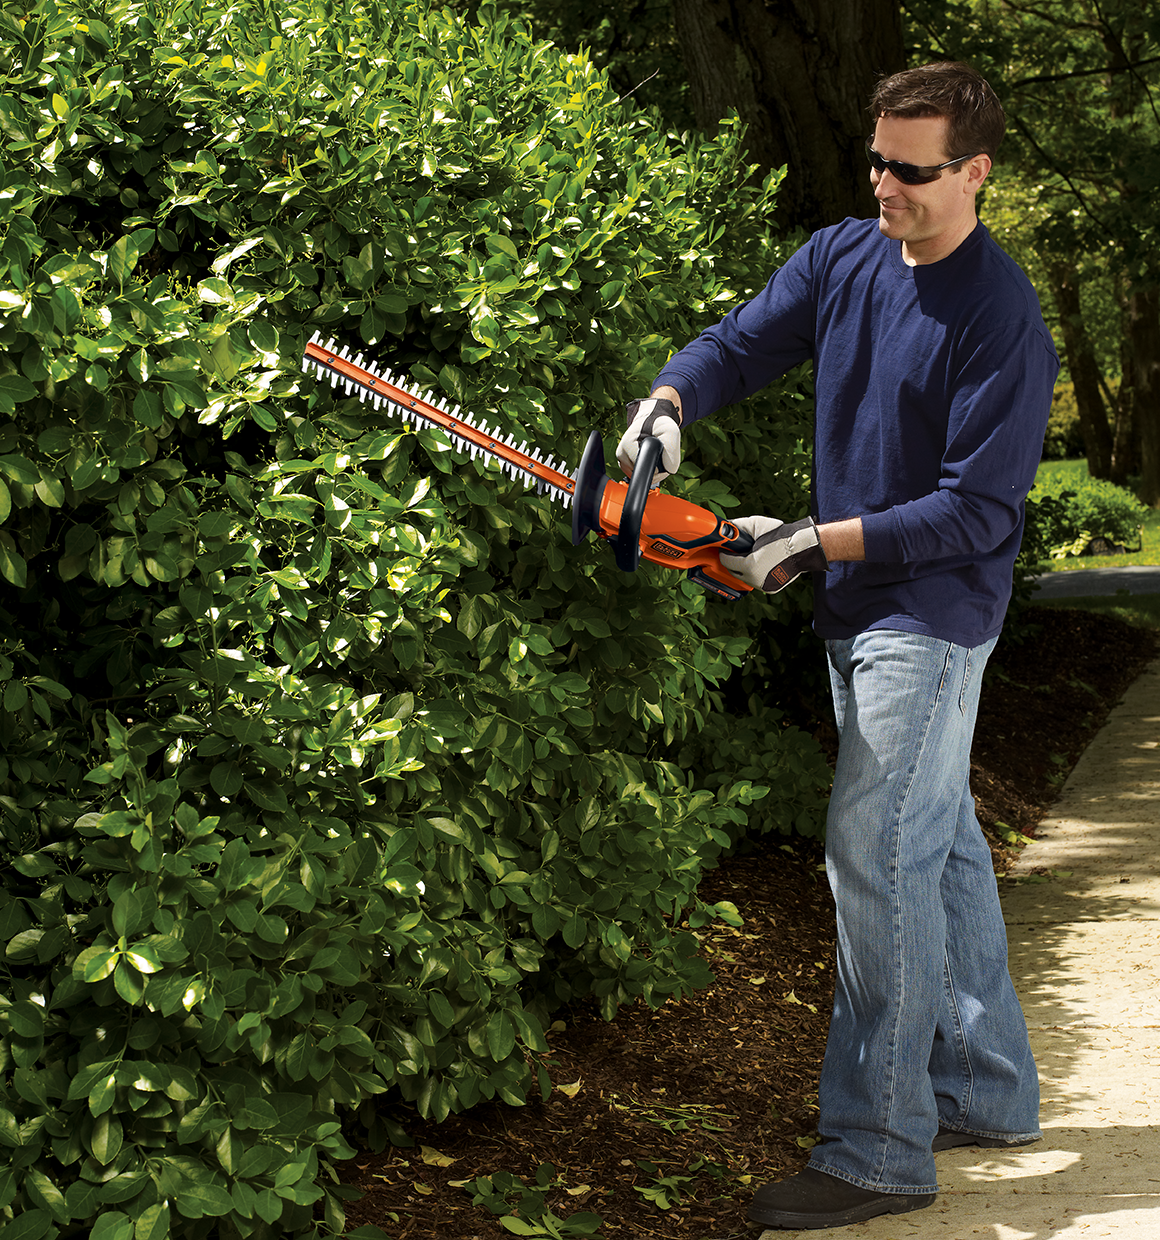 BLACK+DECKER 22 in. 4.0 Amp Corded Dual Action Electric Hedge